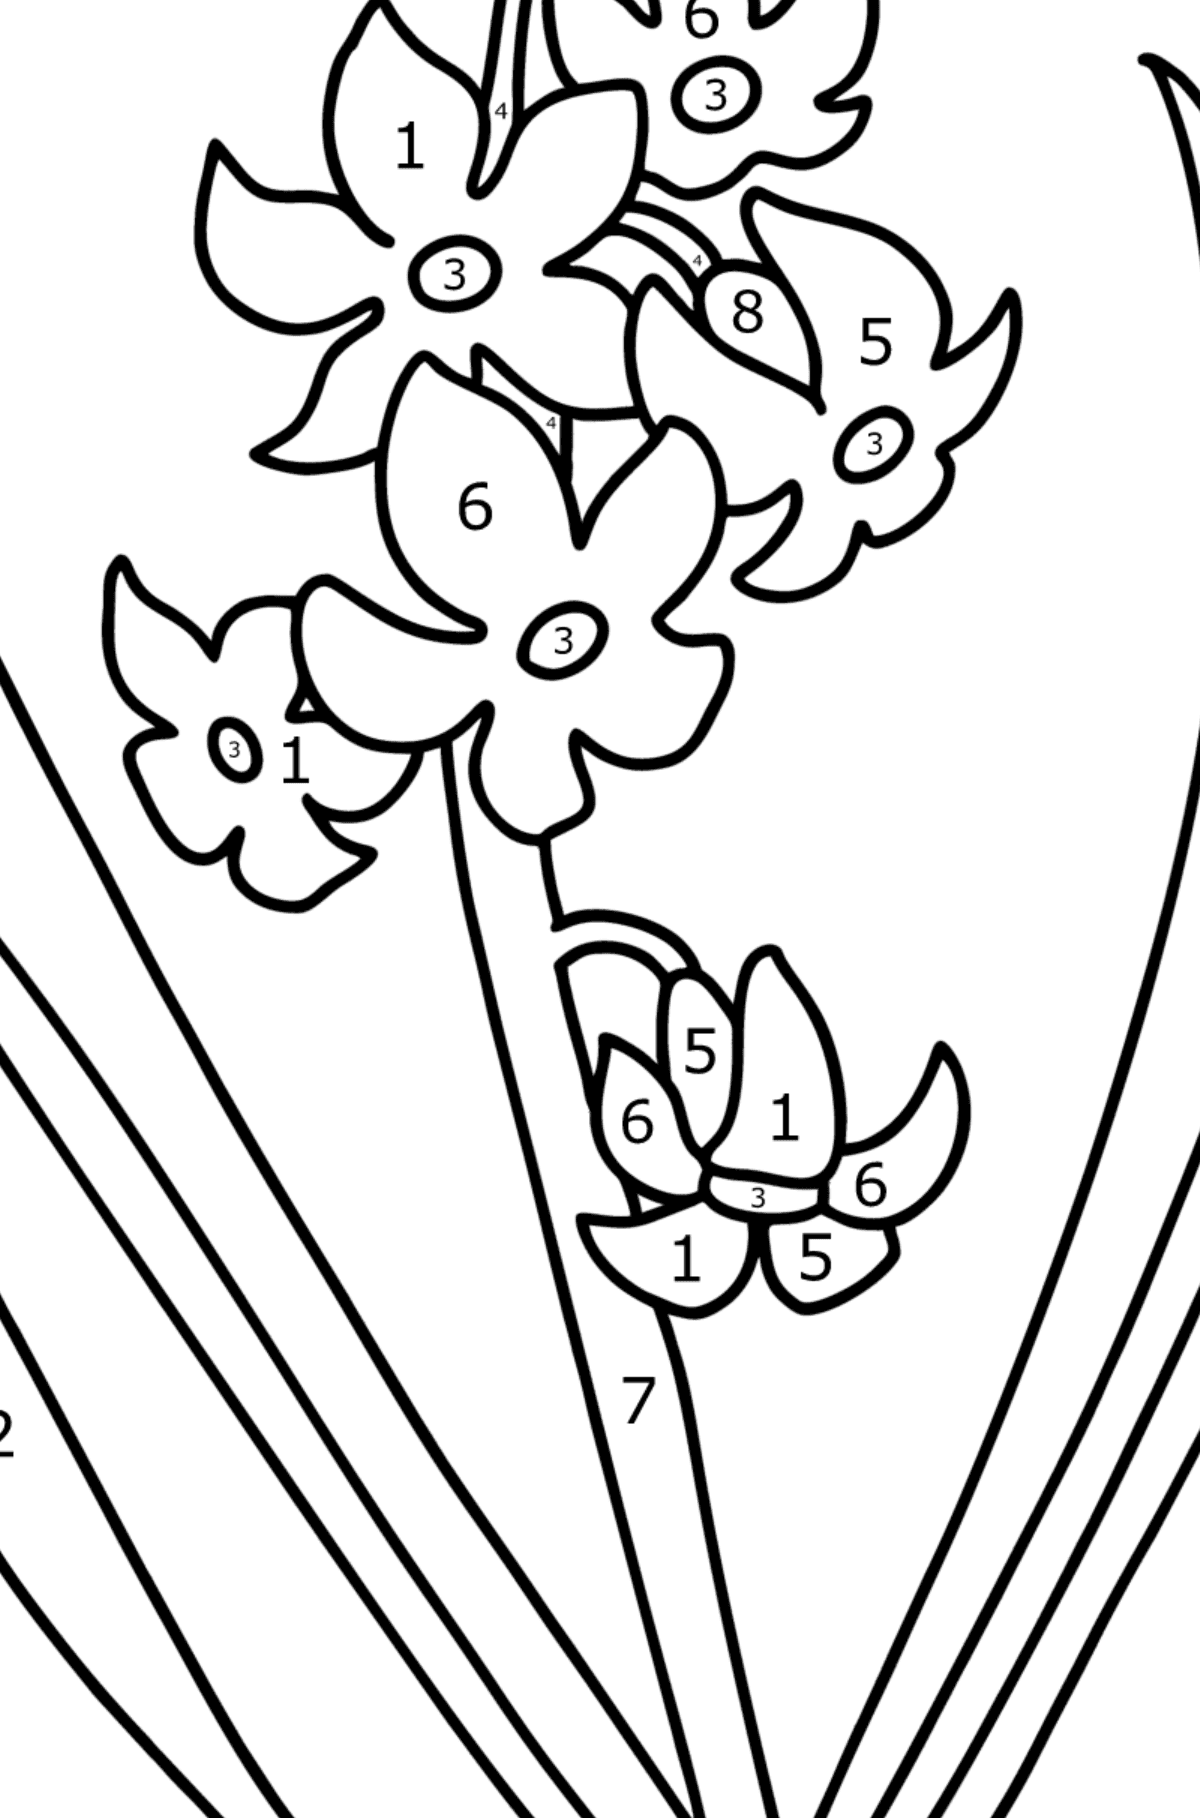 Hyacinth coloring page - Coloring by Numbers for Kids